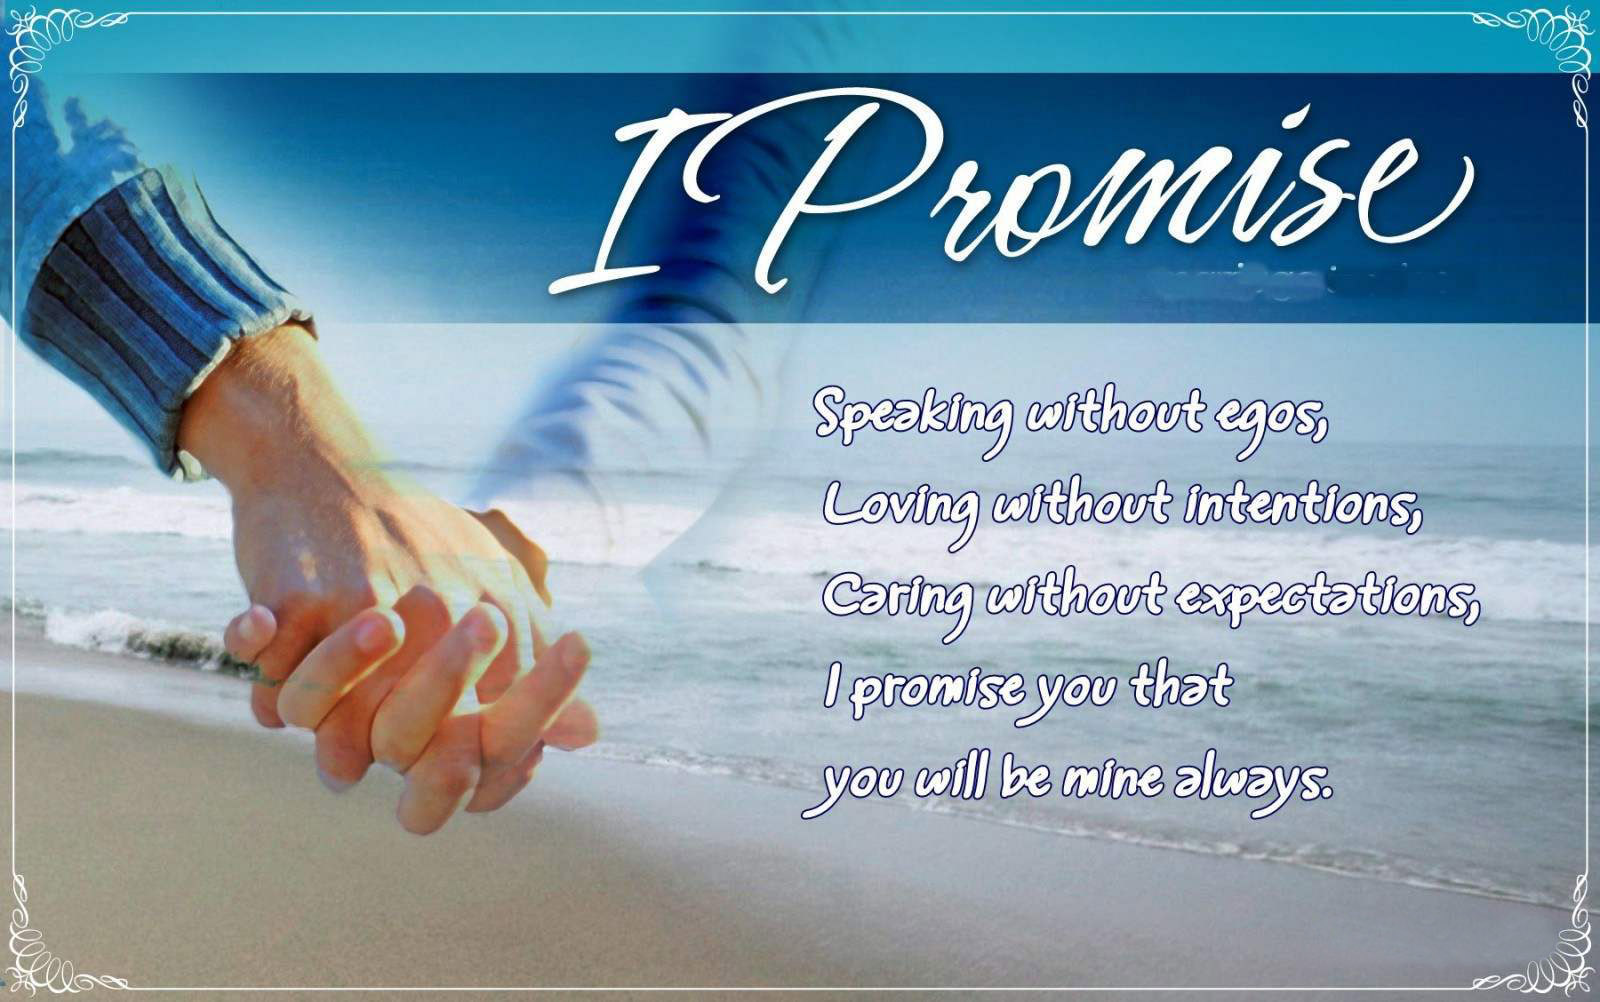 Happy-Promise-Day-2016-Fresh-HD-Wallpapers